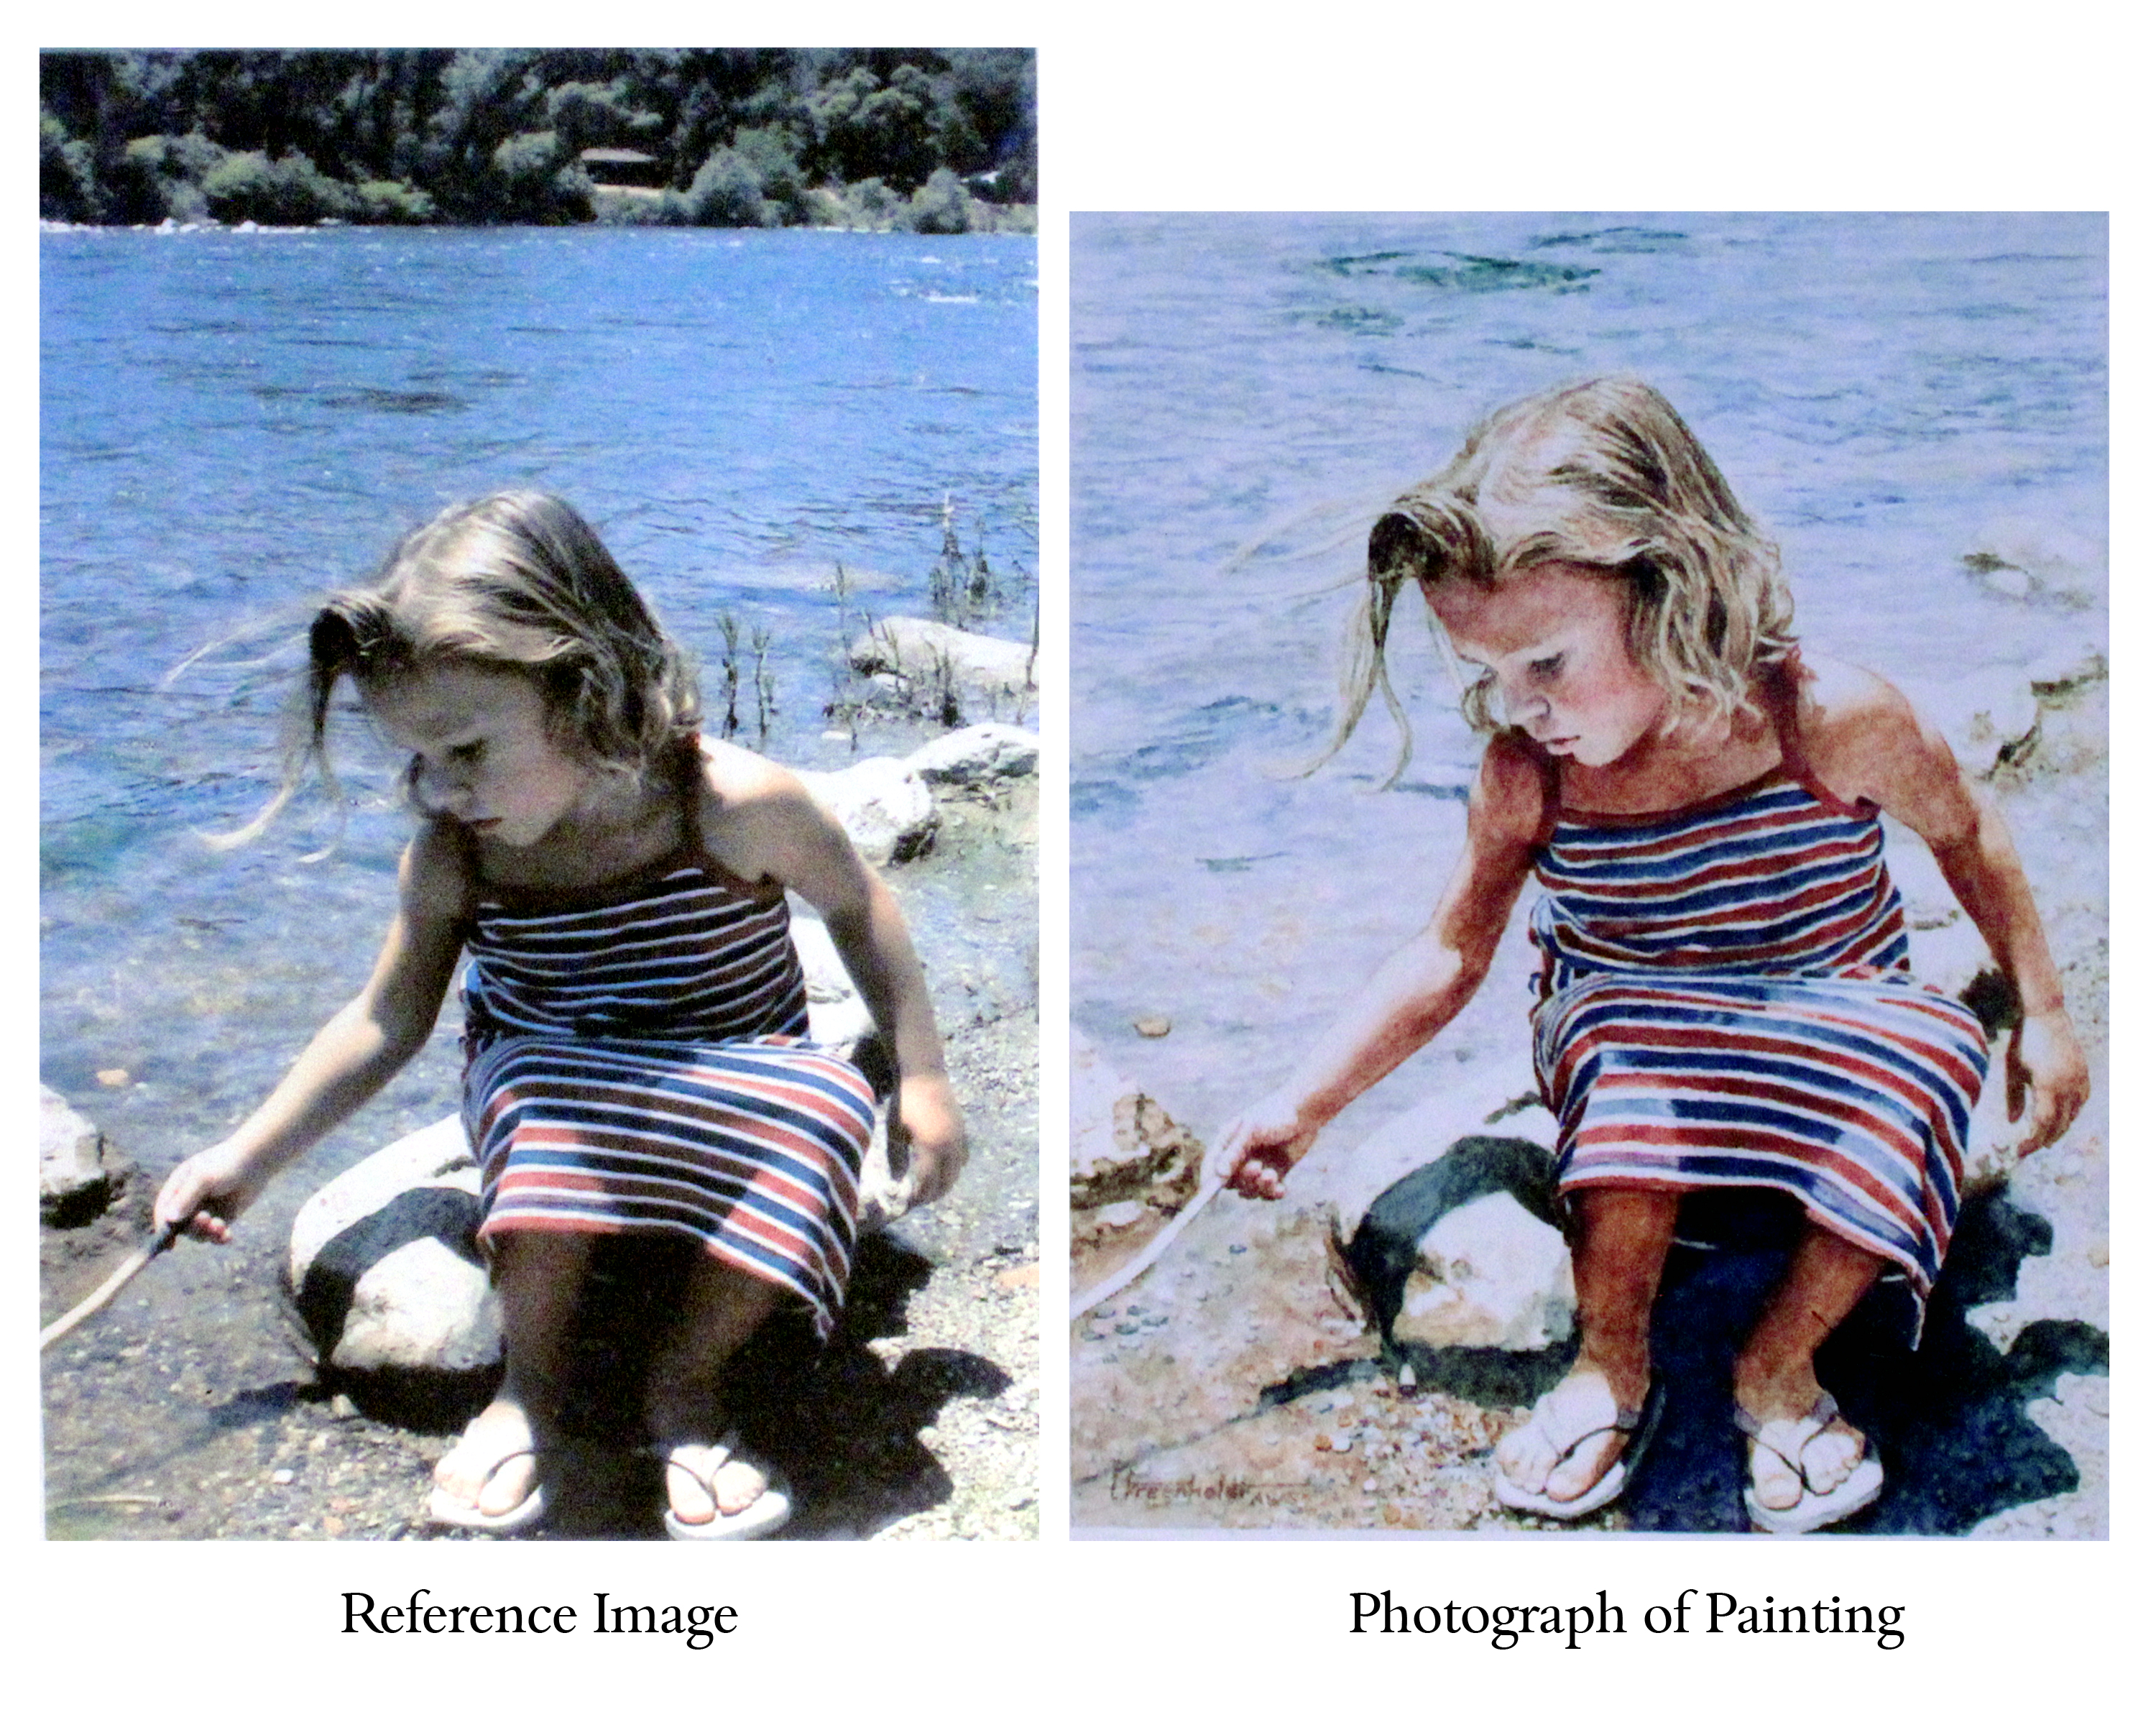 photography vs painting essay